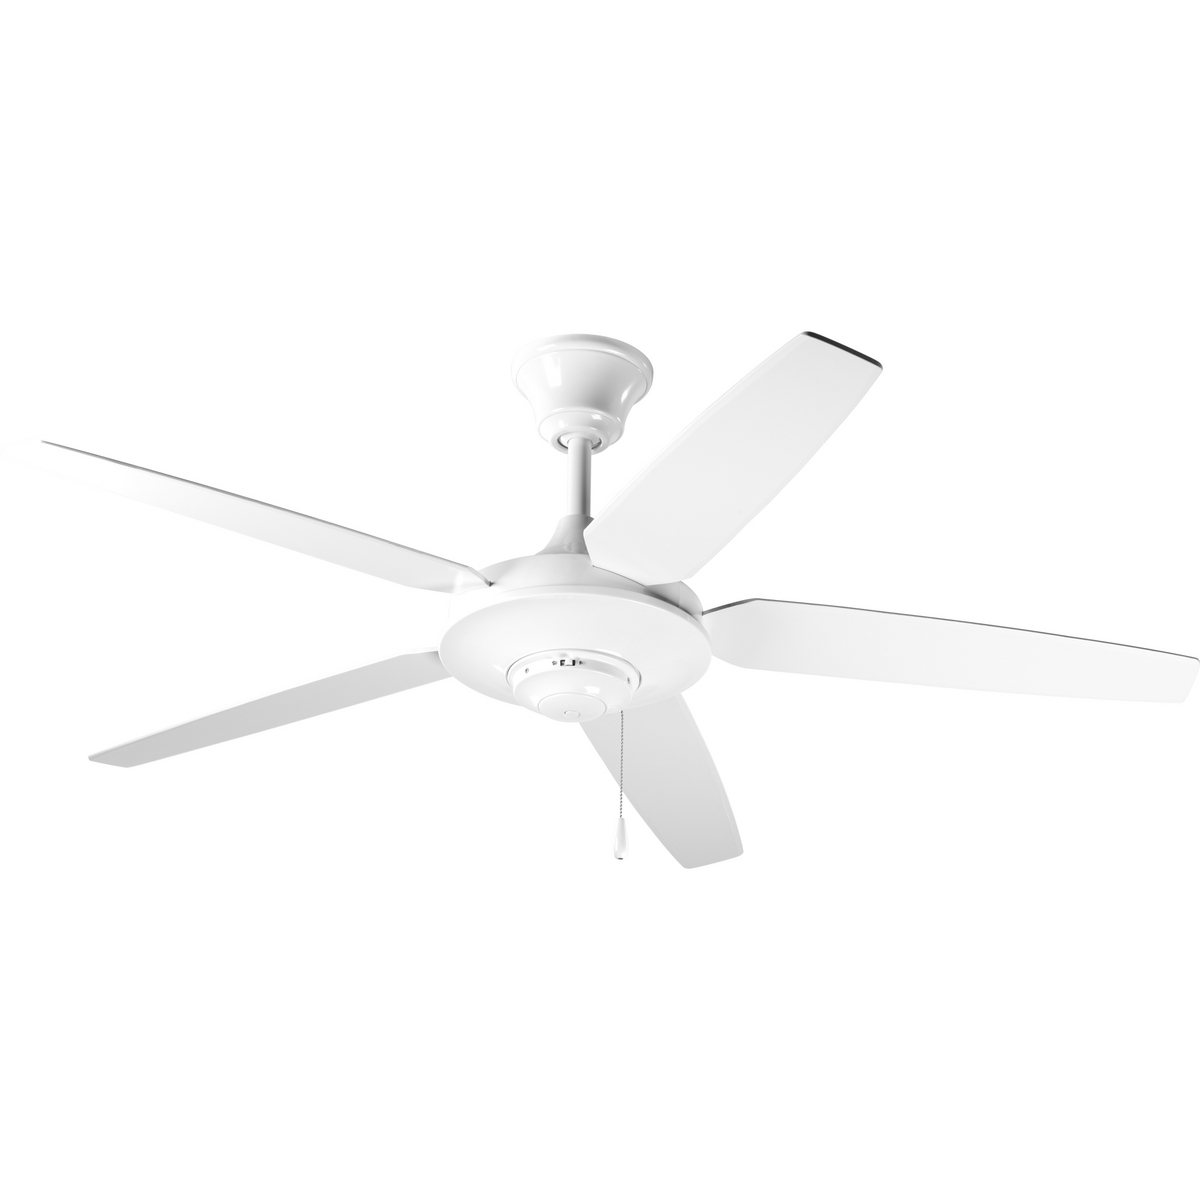 54 in five-blade fan with White blades and a White finish. The AirPro Signature ceiling fan offers great performance and value. This contemporary styled fan features a powerful, 3-speed motor that can be reversed to provide year-round comfort. Includes innovative canopy system that can be installed on vaulted ceilings up to 12:12 pitch. A 1 in x 6 in downrod is included, however, longer downrods can be ordered separately. Can be used to comply with California Title 20.